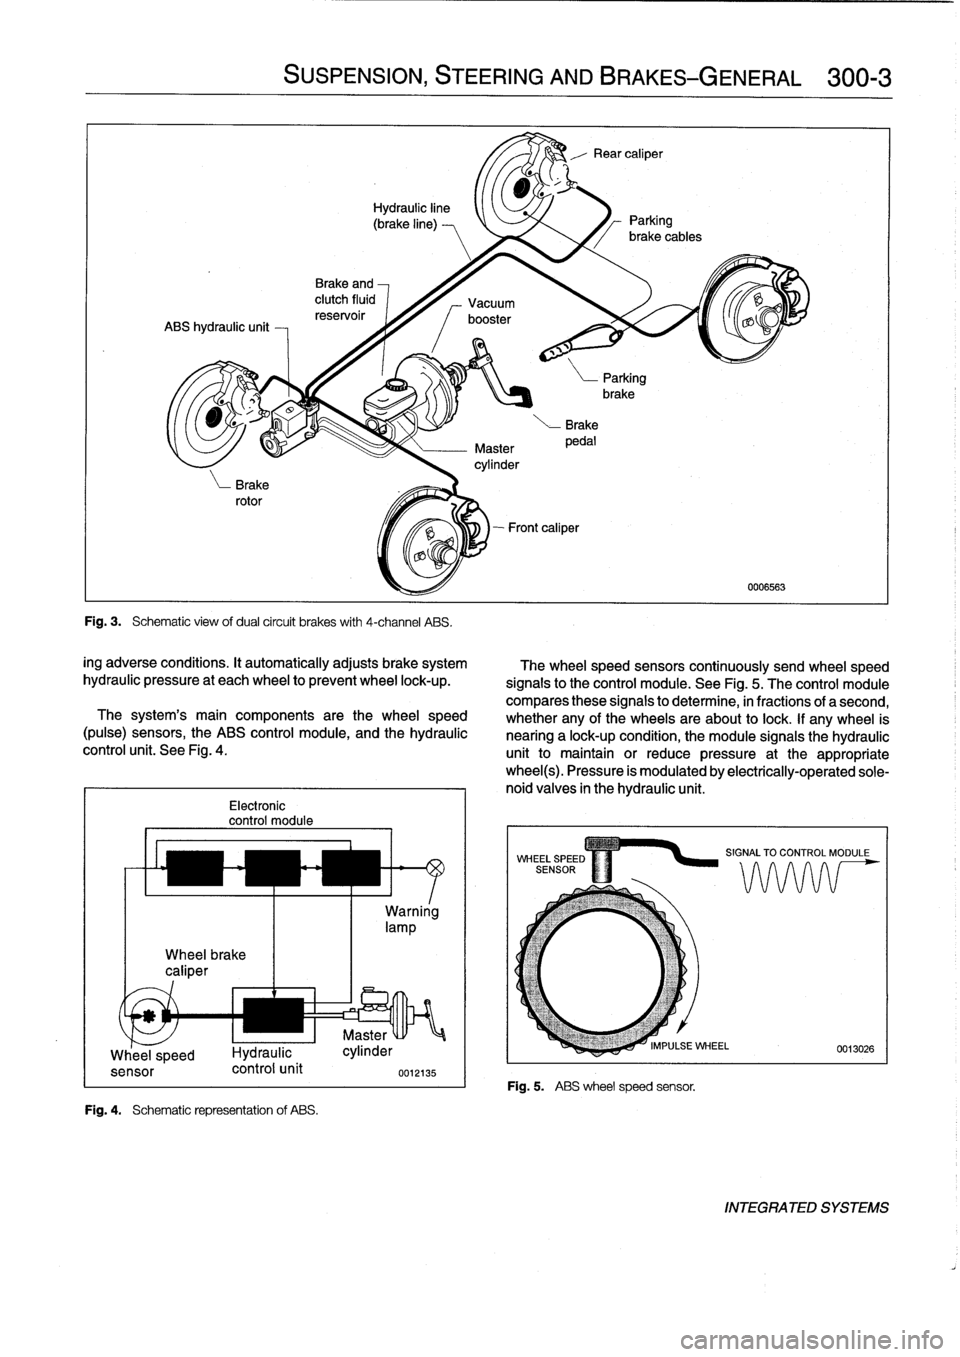 BMW 323i 1995 E36 User Guide 
Wheel
brake
caliper

Electronic
control
module
Fig
.
4
.

	

Schematic
representation
of
ABS
.

SUSPENSION,
STEERING
ANDBRAKES-GENERAL

	

300-3

Fig
.
3
.

	

Schematic
view
ofdual
circuit
brakes
wi